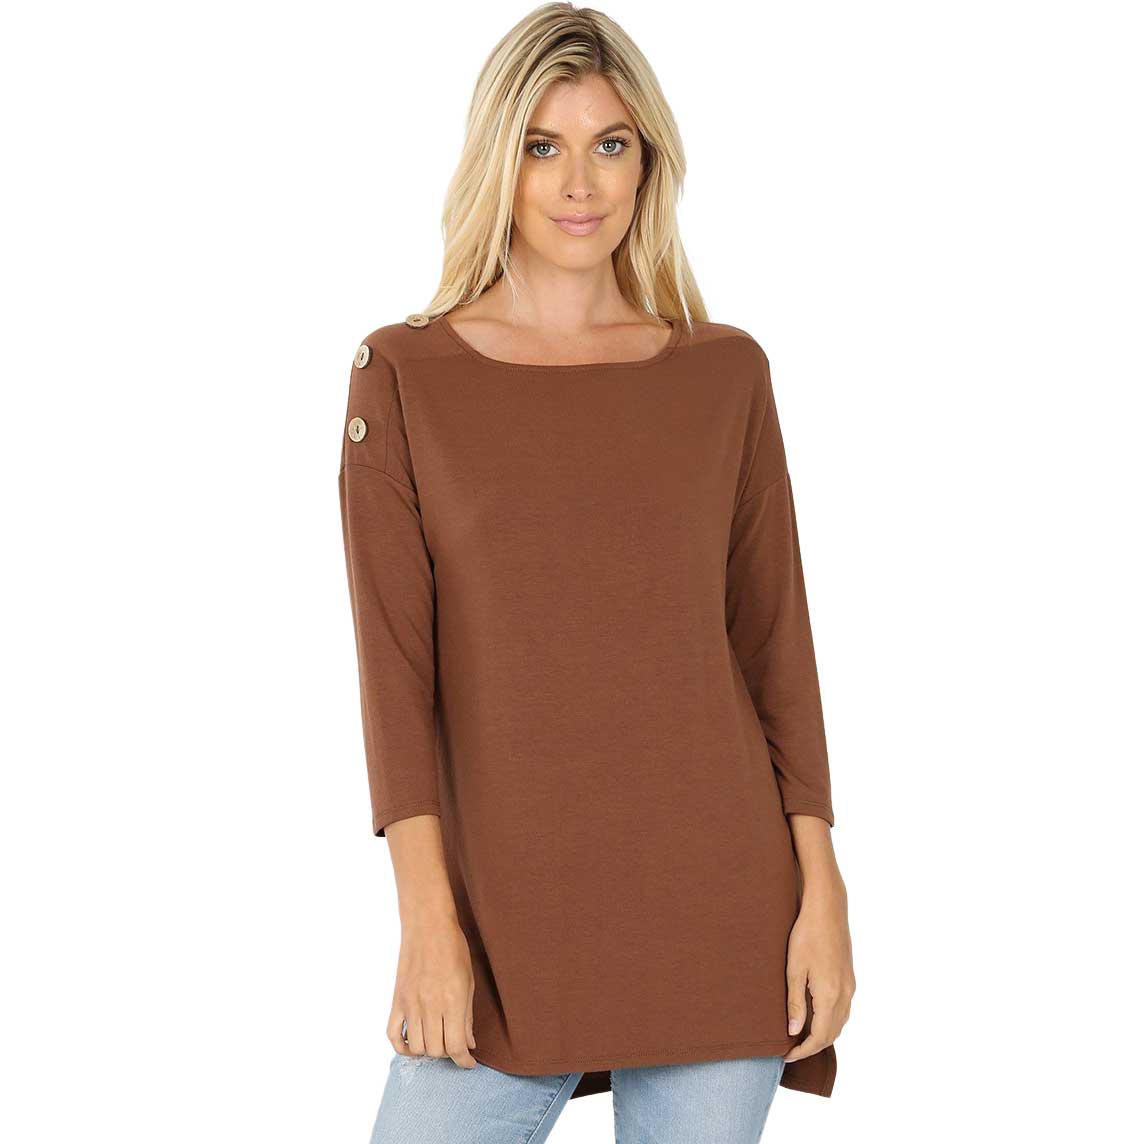 2082 - Boat Neck Hi-Lo Tops w/Wooden Buttons LIGHT BROWN Boat Neck Hi-Lo Top w/ Wooden Buttons 2082 - Large